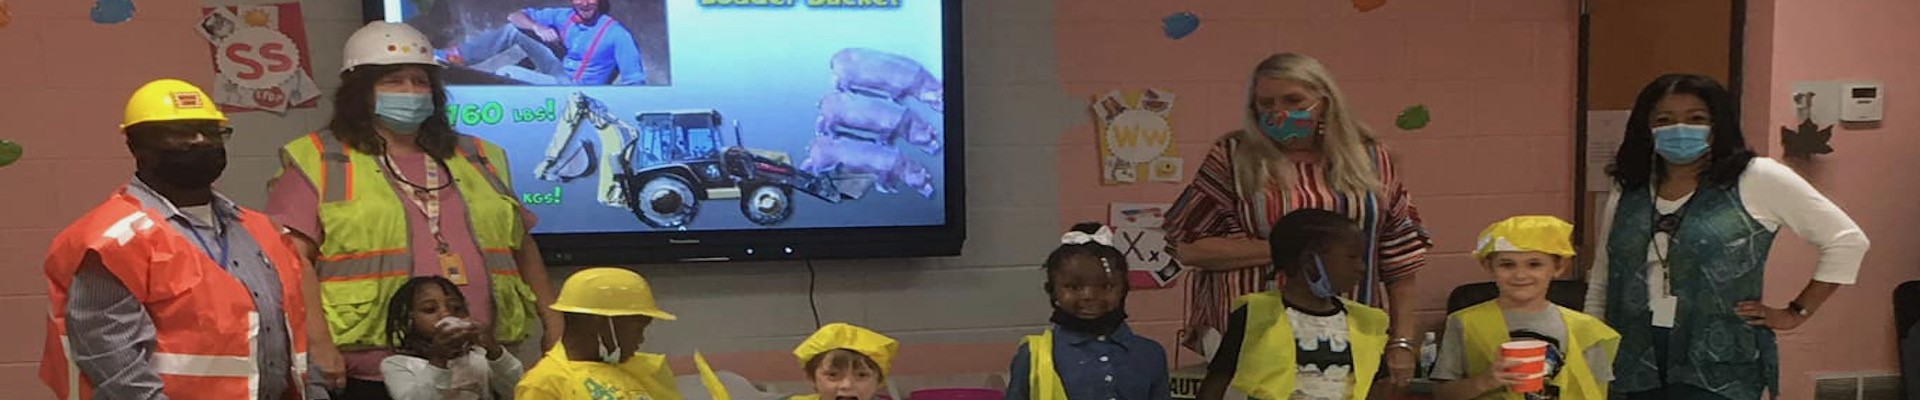 Sherland's class as construction workers